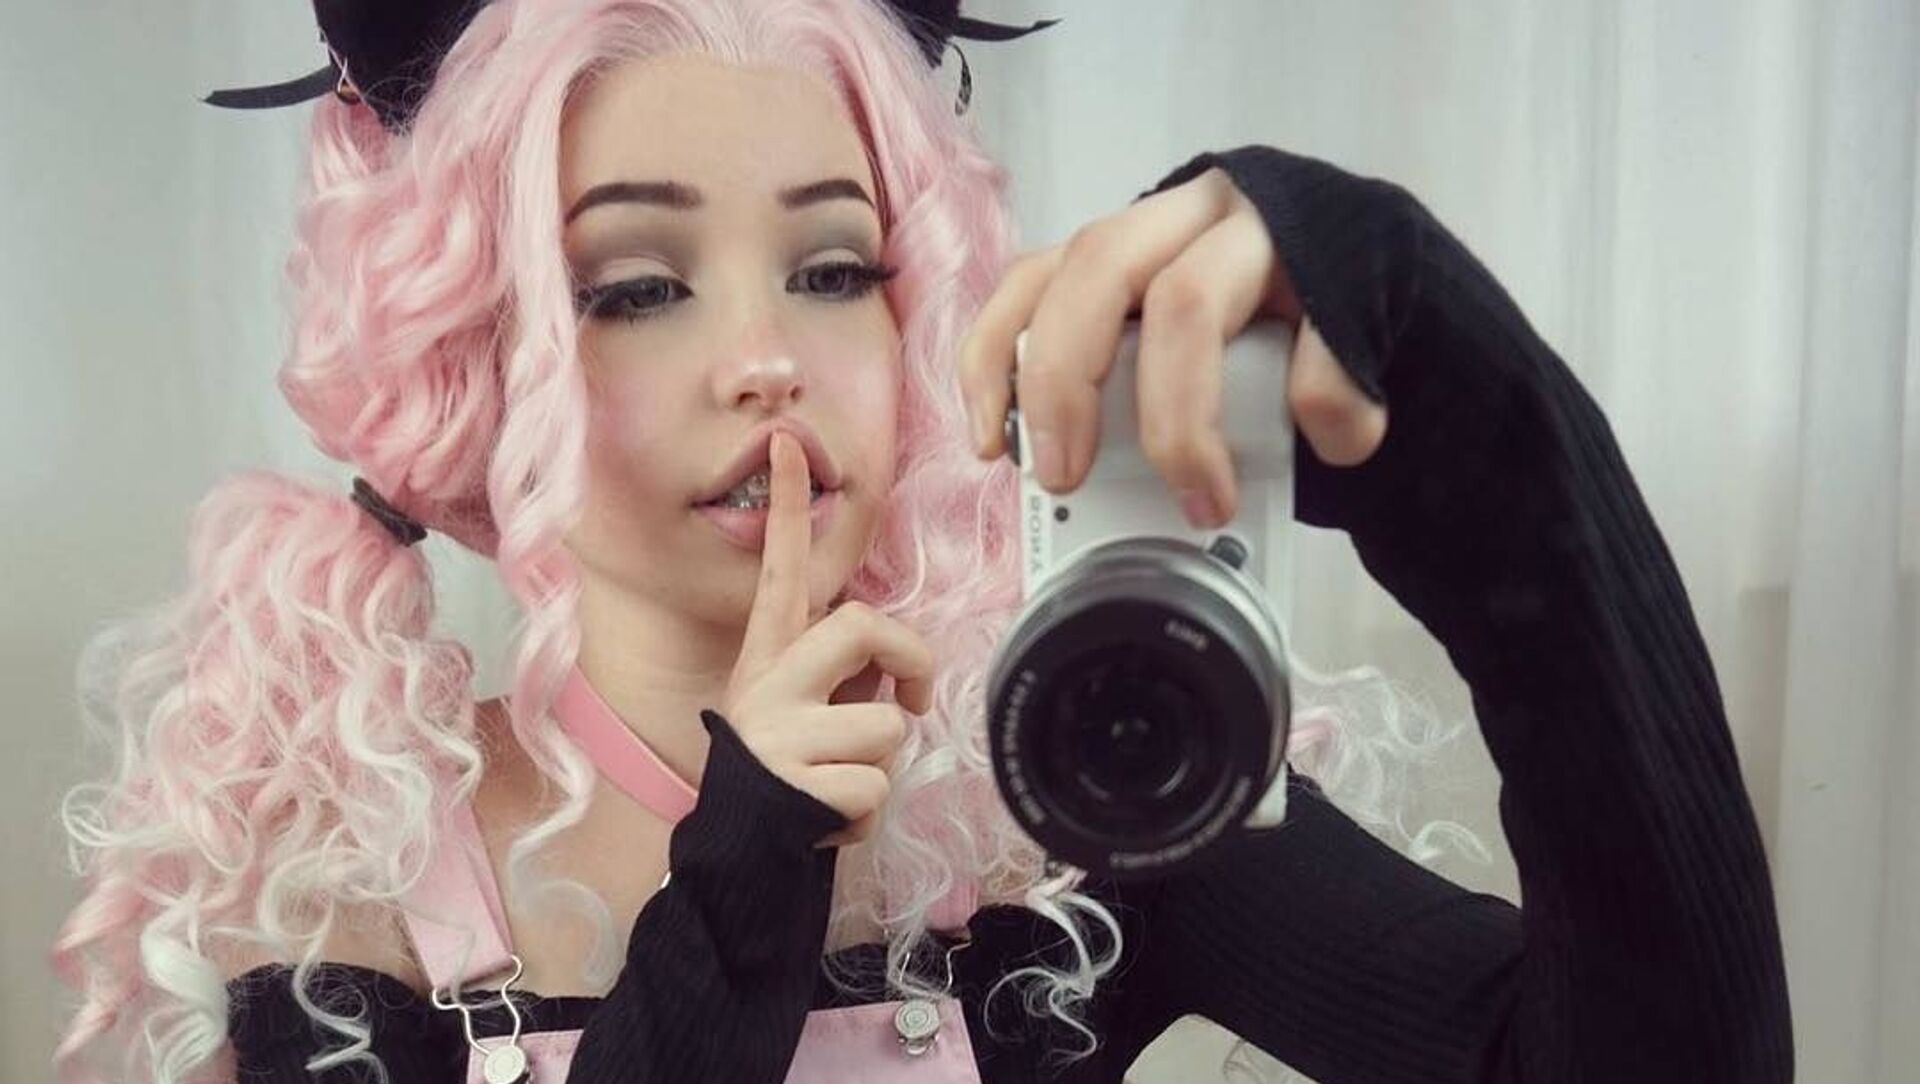 Belle Delphine banned from Instagram. What do you think: good or